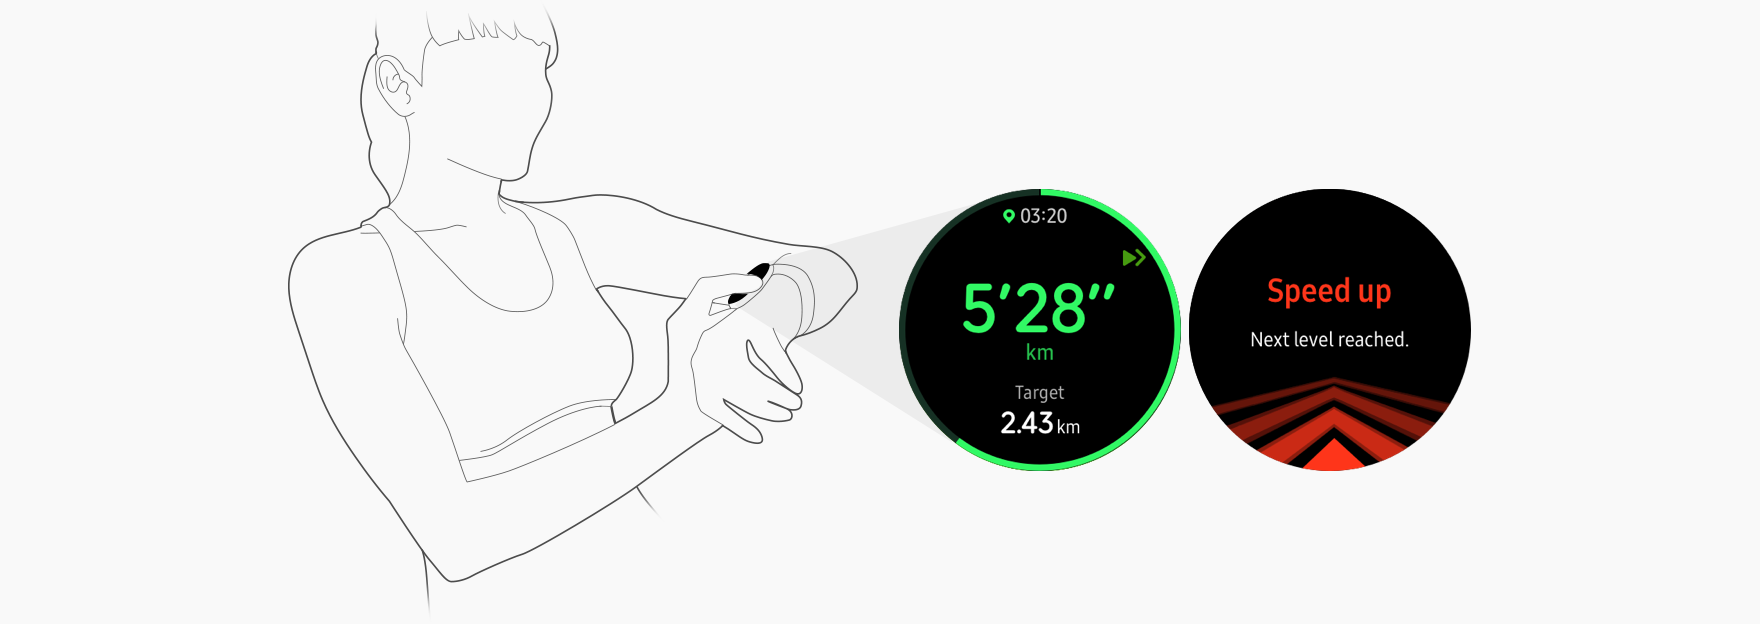 The user can start running with a pace setter target in the Samsung Health app. The watch provides responses by displaying progress to the target or encouraging the user to run faster.